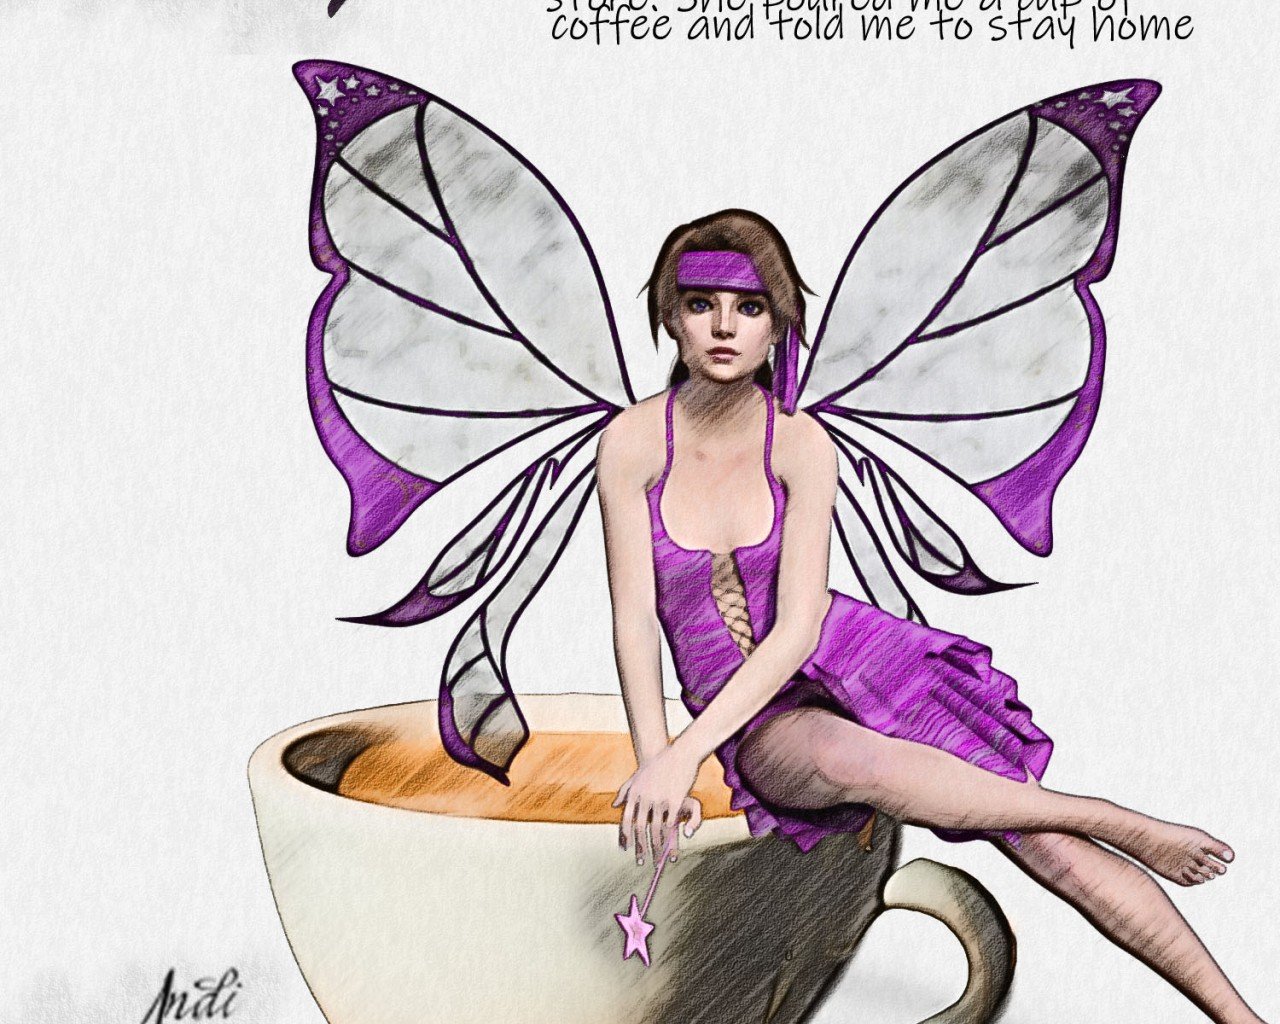 Poster Image for Paisley the Pixie